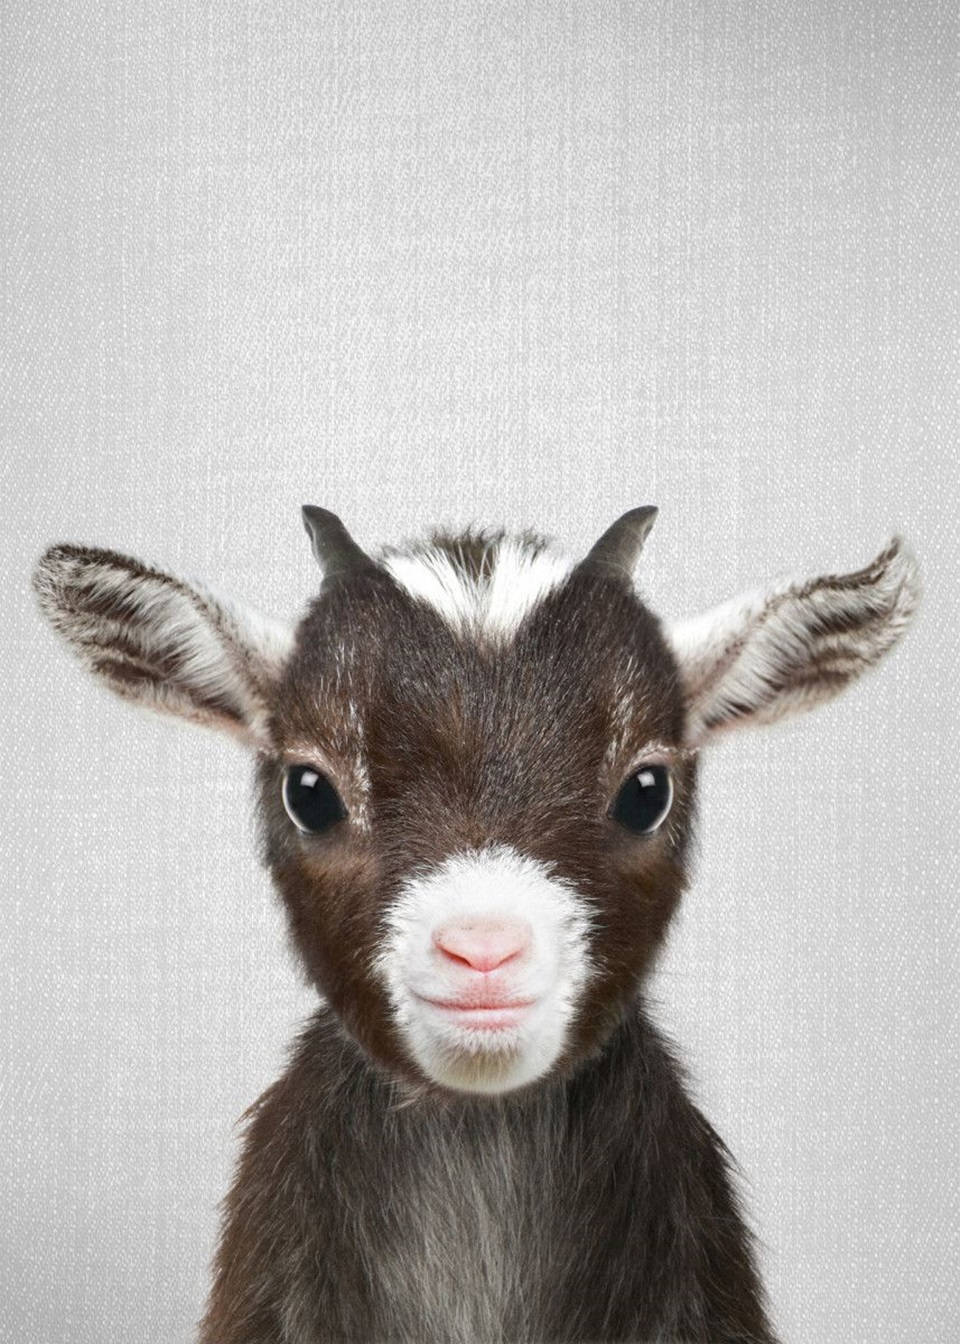 Black And White Baby Goat Poster Wallpaper